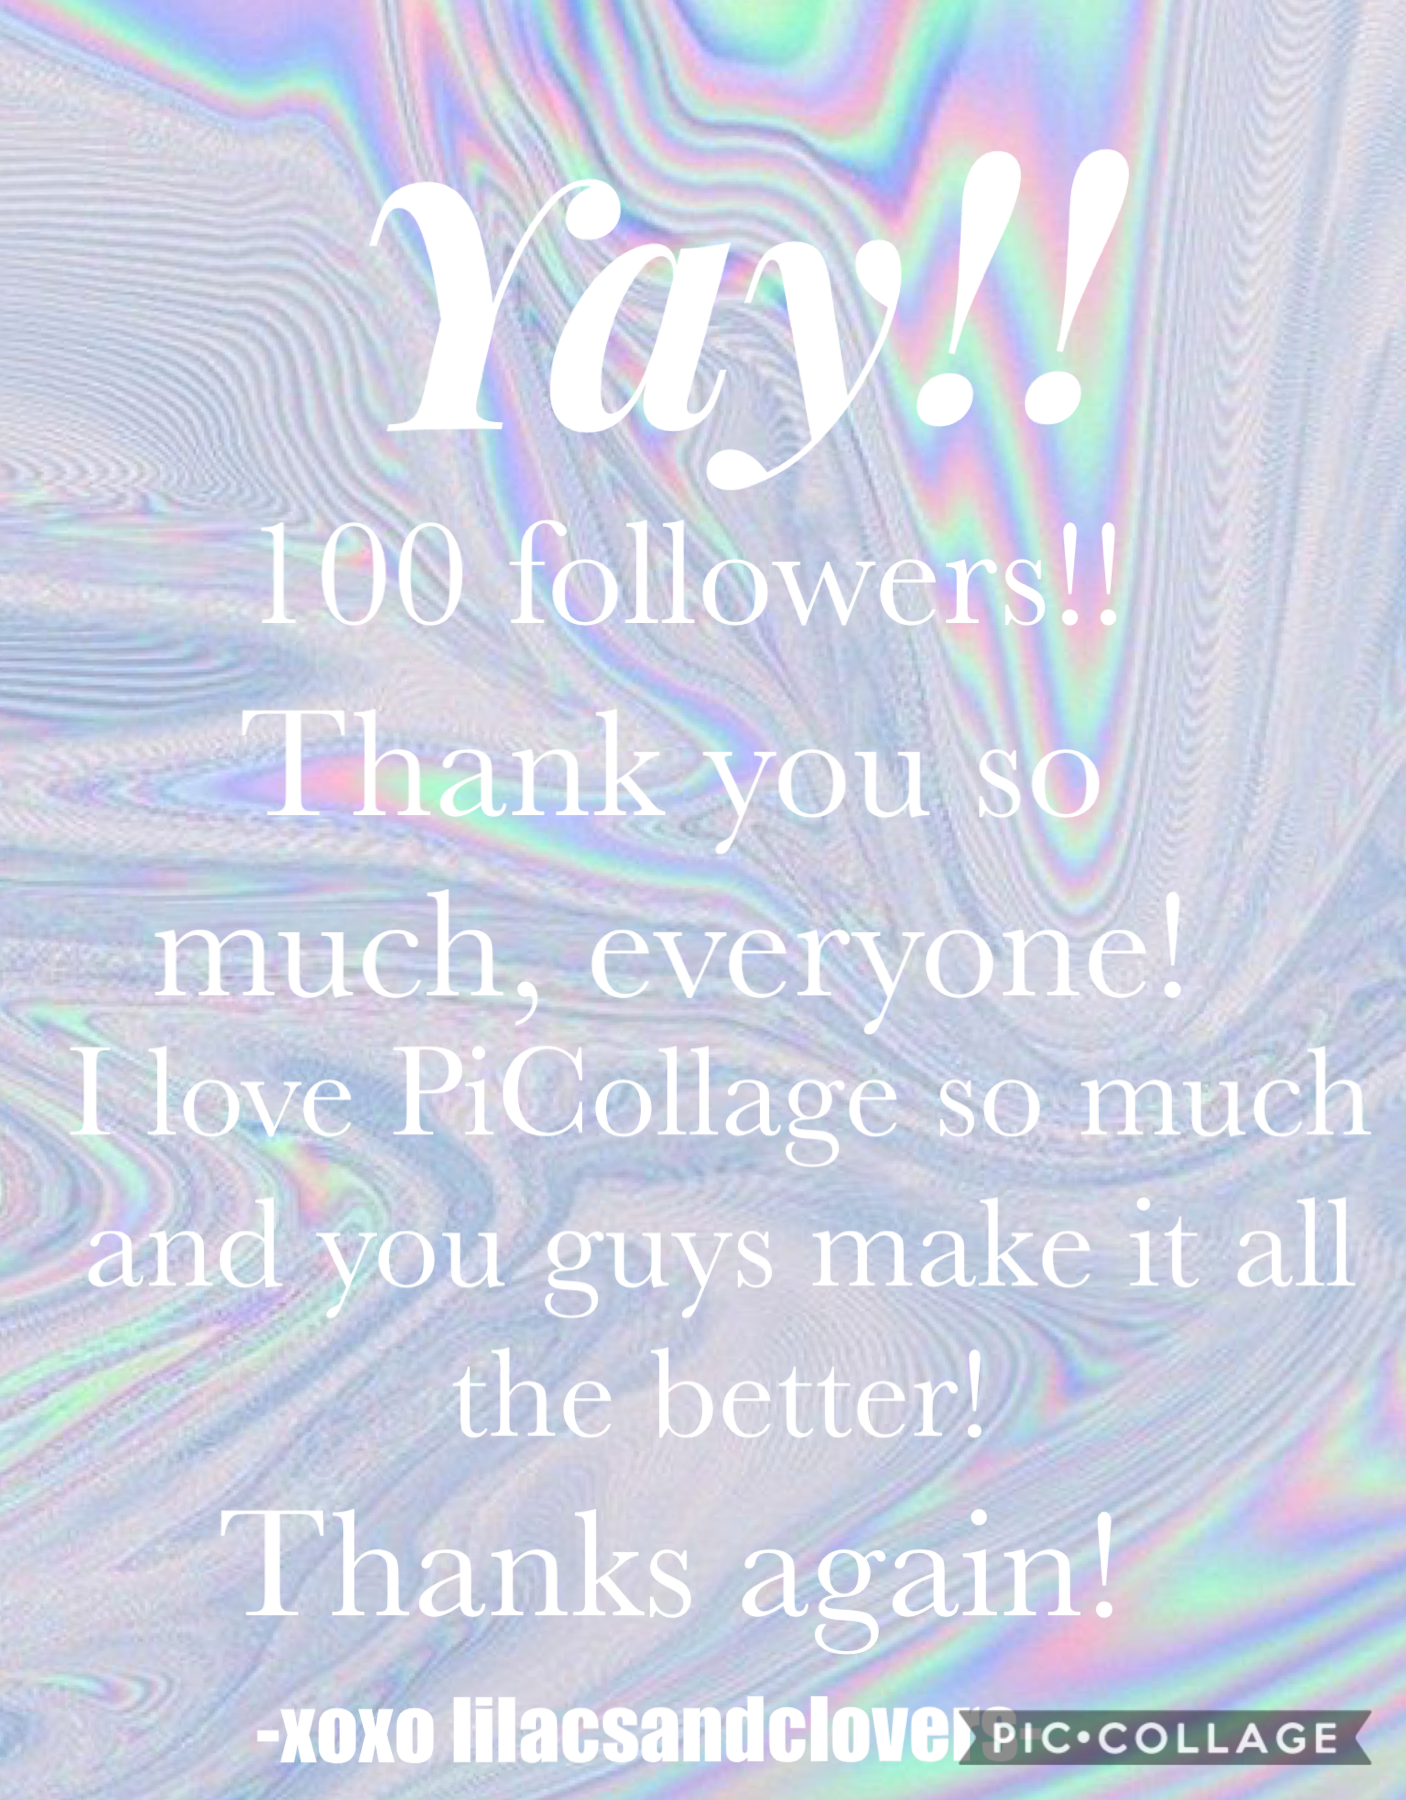 Tysm for 100 followers! Xoxo lilacsandclovers!💖